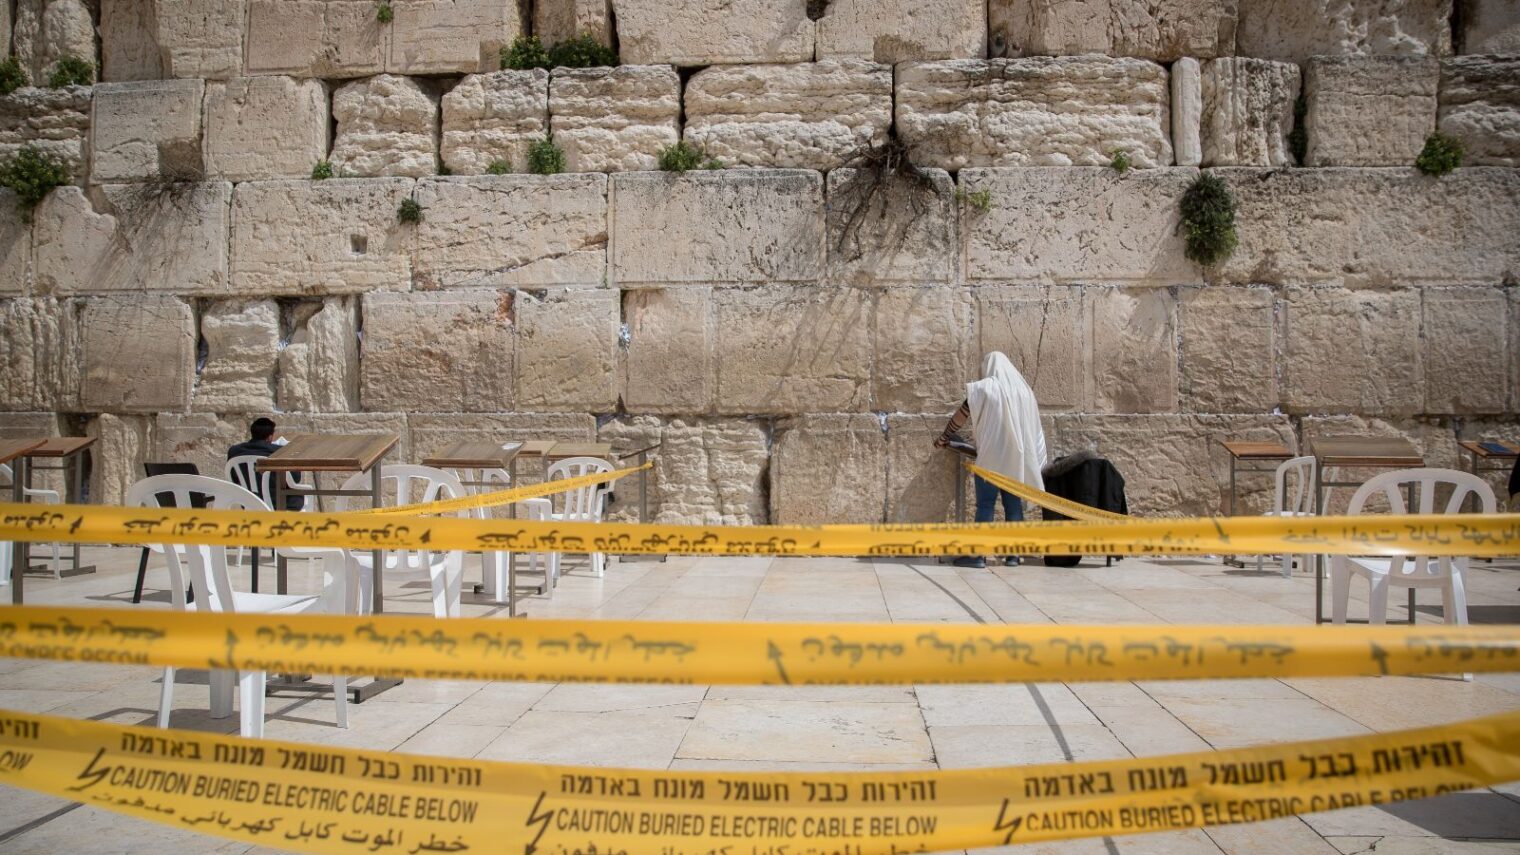 A man prays in an enclosed area at the Western Wall in Jerusalem. Photo by Yonatan Sindel/Flash90